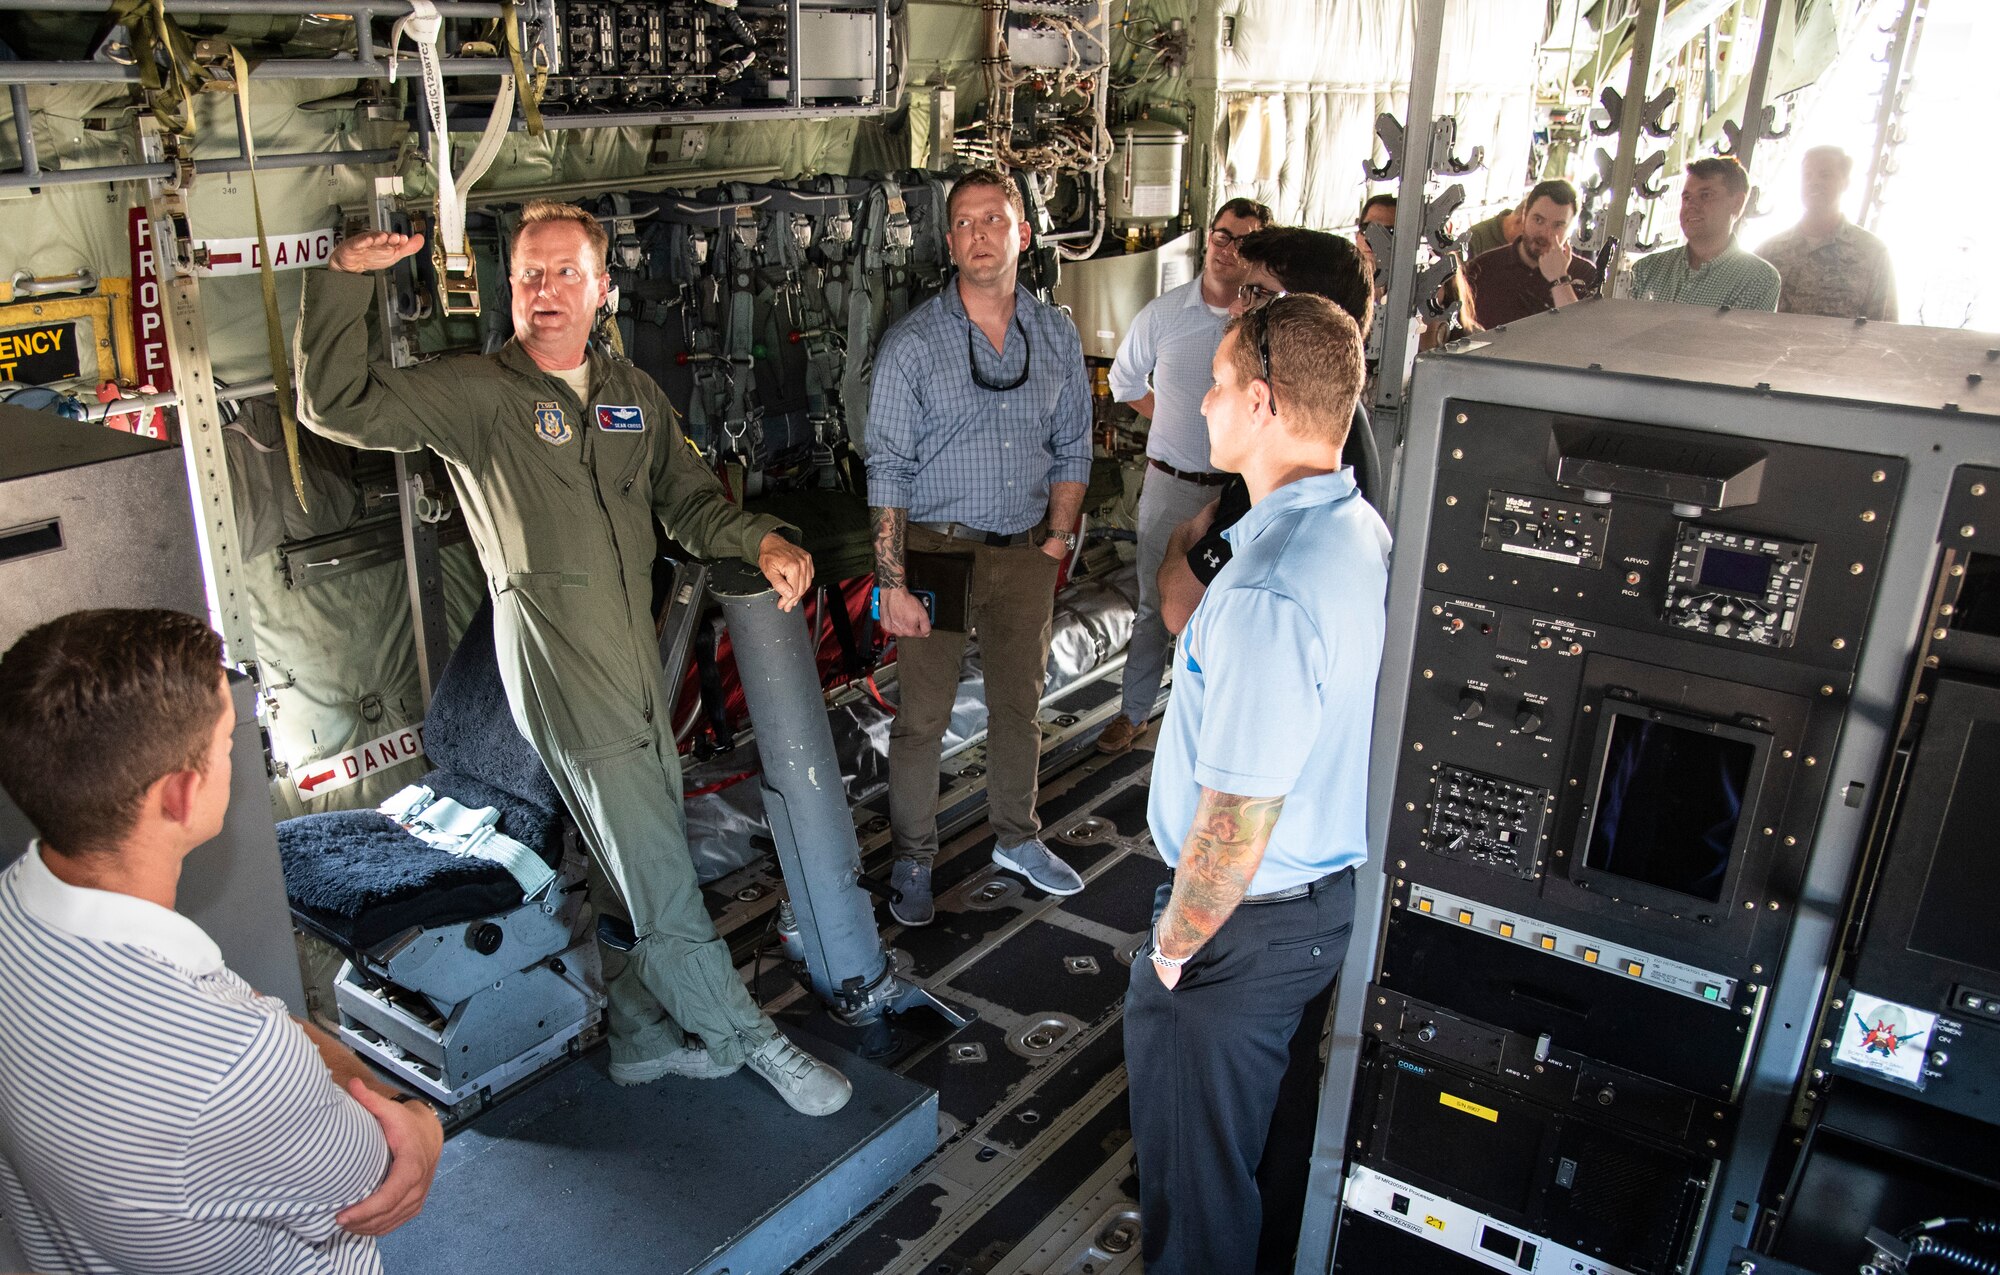 Lt. Col. Sean Cross, 53rd Weather Reconnaissance Squadron instructor pilot, gives a tour of a WC-130J of the 53rd WRS, 403rd Wing, during a base tour for Congressional Staffers from the offices of Senator Wicker, Senator Hyde-Smith and Congressman Kelly on Aug. 6, 2018, at Keesler Air Force Base, Mississippi. The tour gave an overview of the 403rd WG, 81st Training Wing and highlighted the potential issues which may need support. (U.S. Air Force photo by Senior Airman Nathan Byrnes